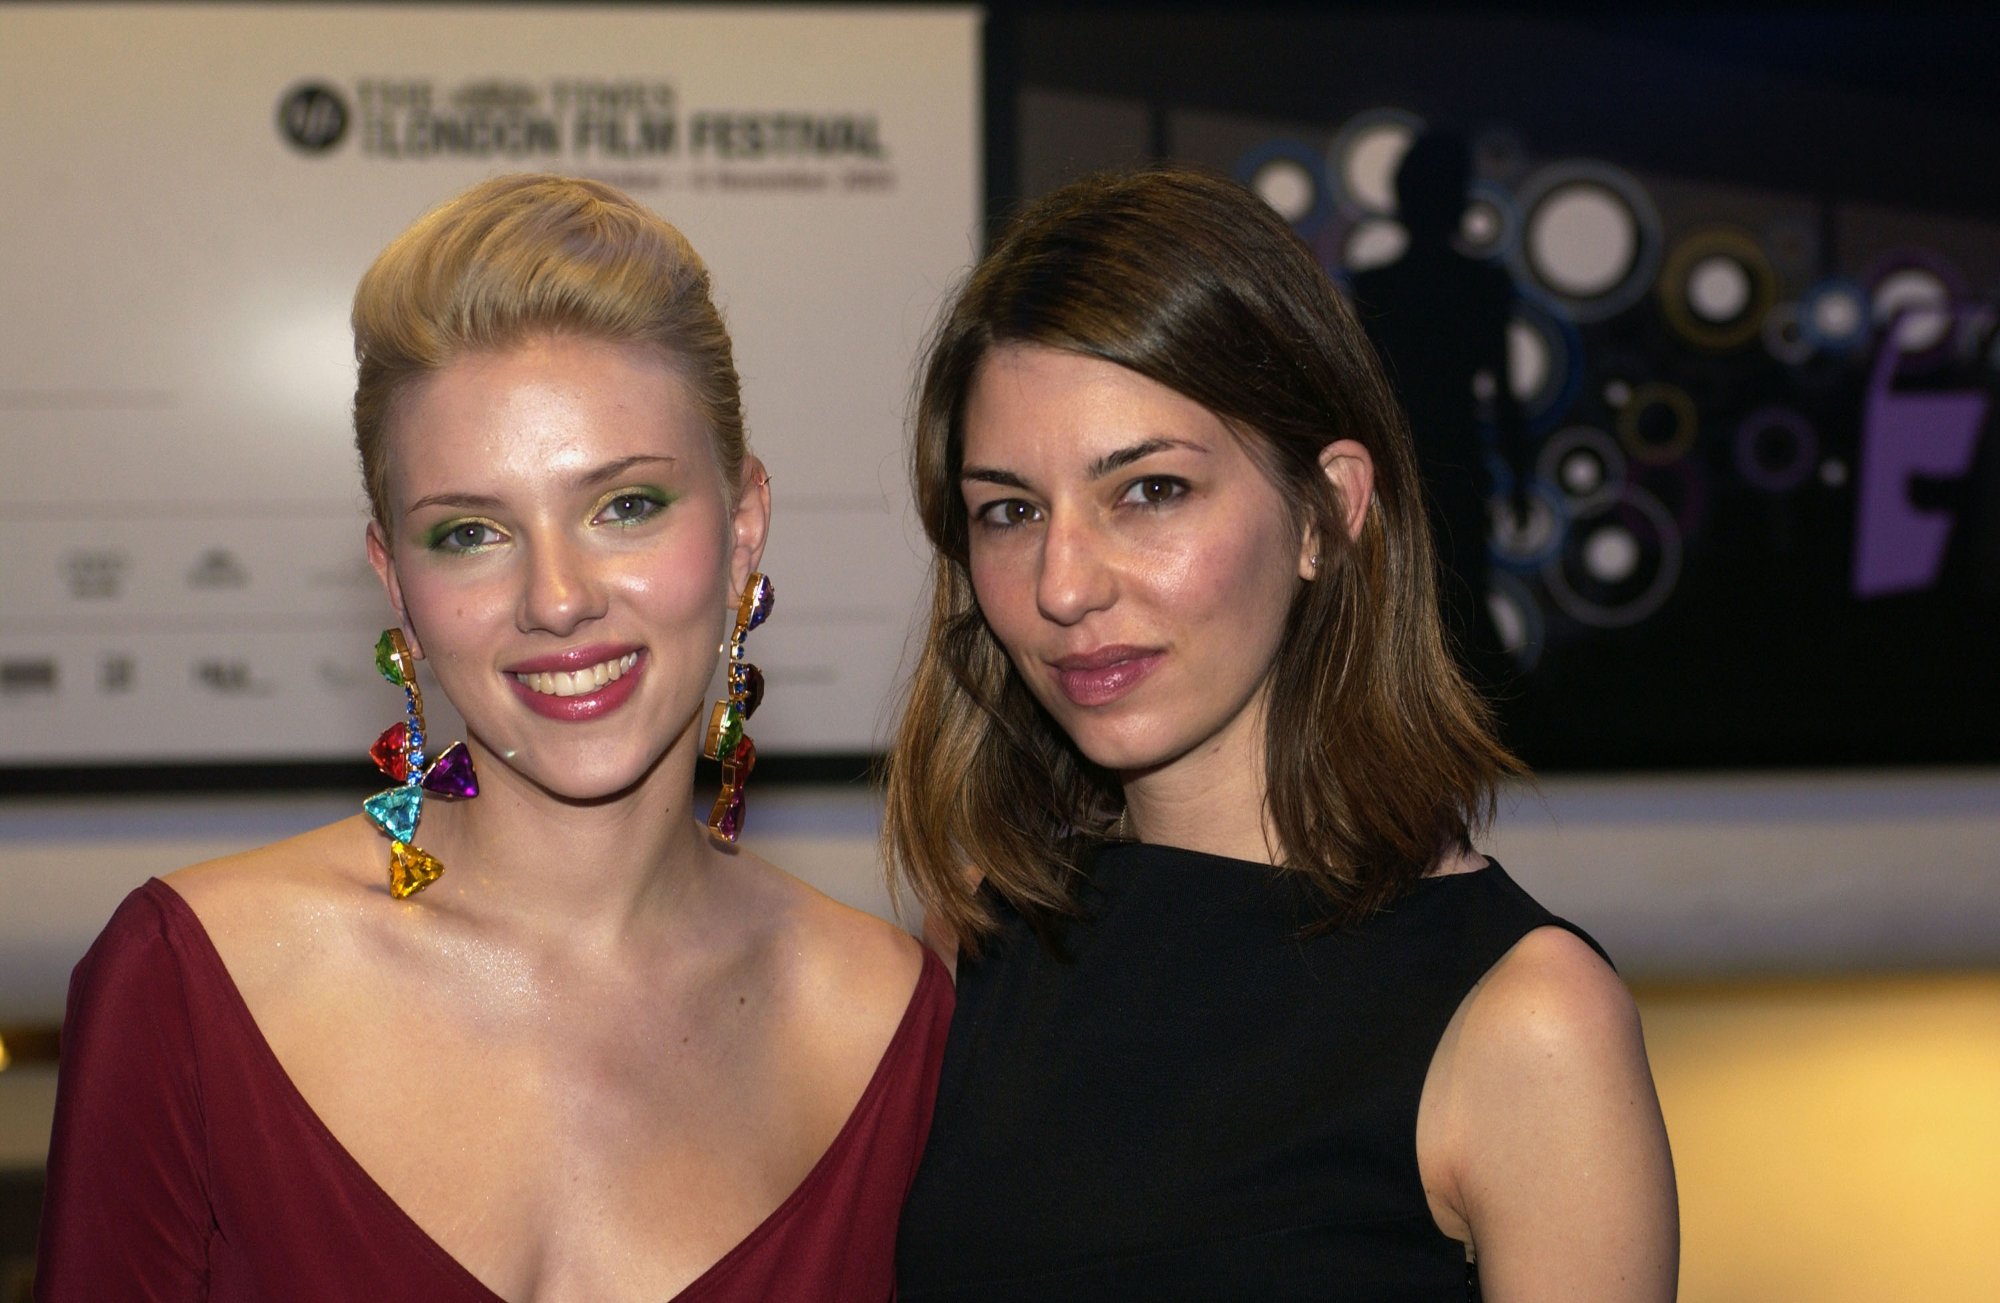 'Lost in Translation' Scarlett Johansson and Sofia Coppola smiling in red and black dresses in front of BFI London Film Festival sign